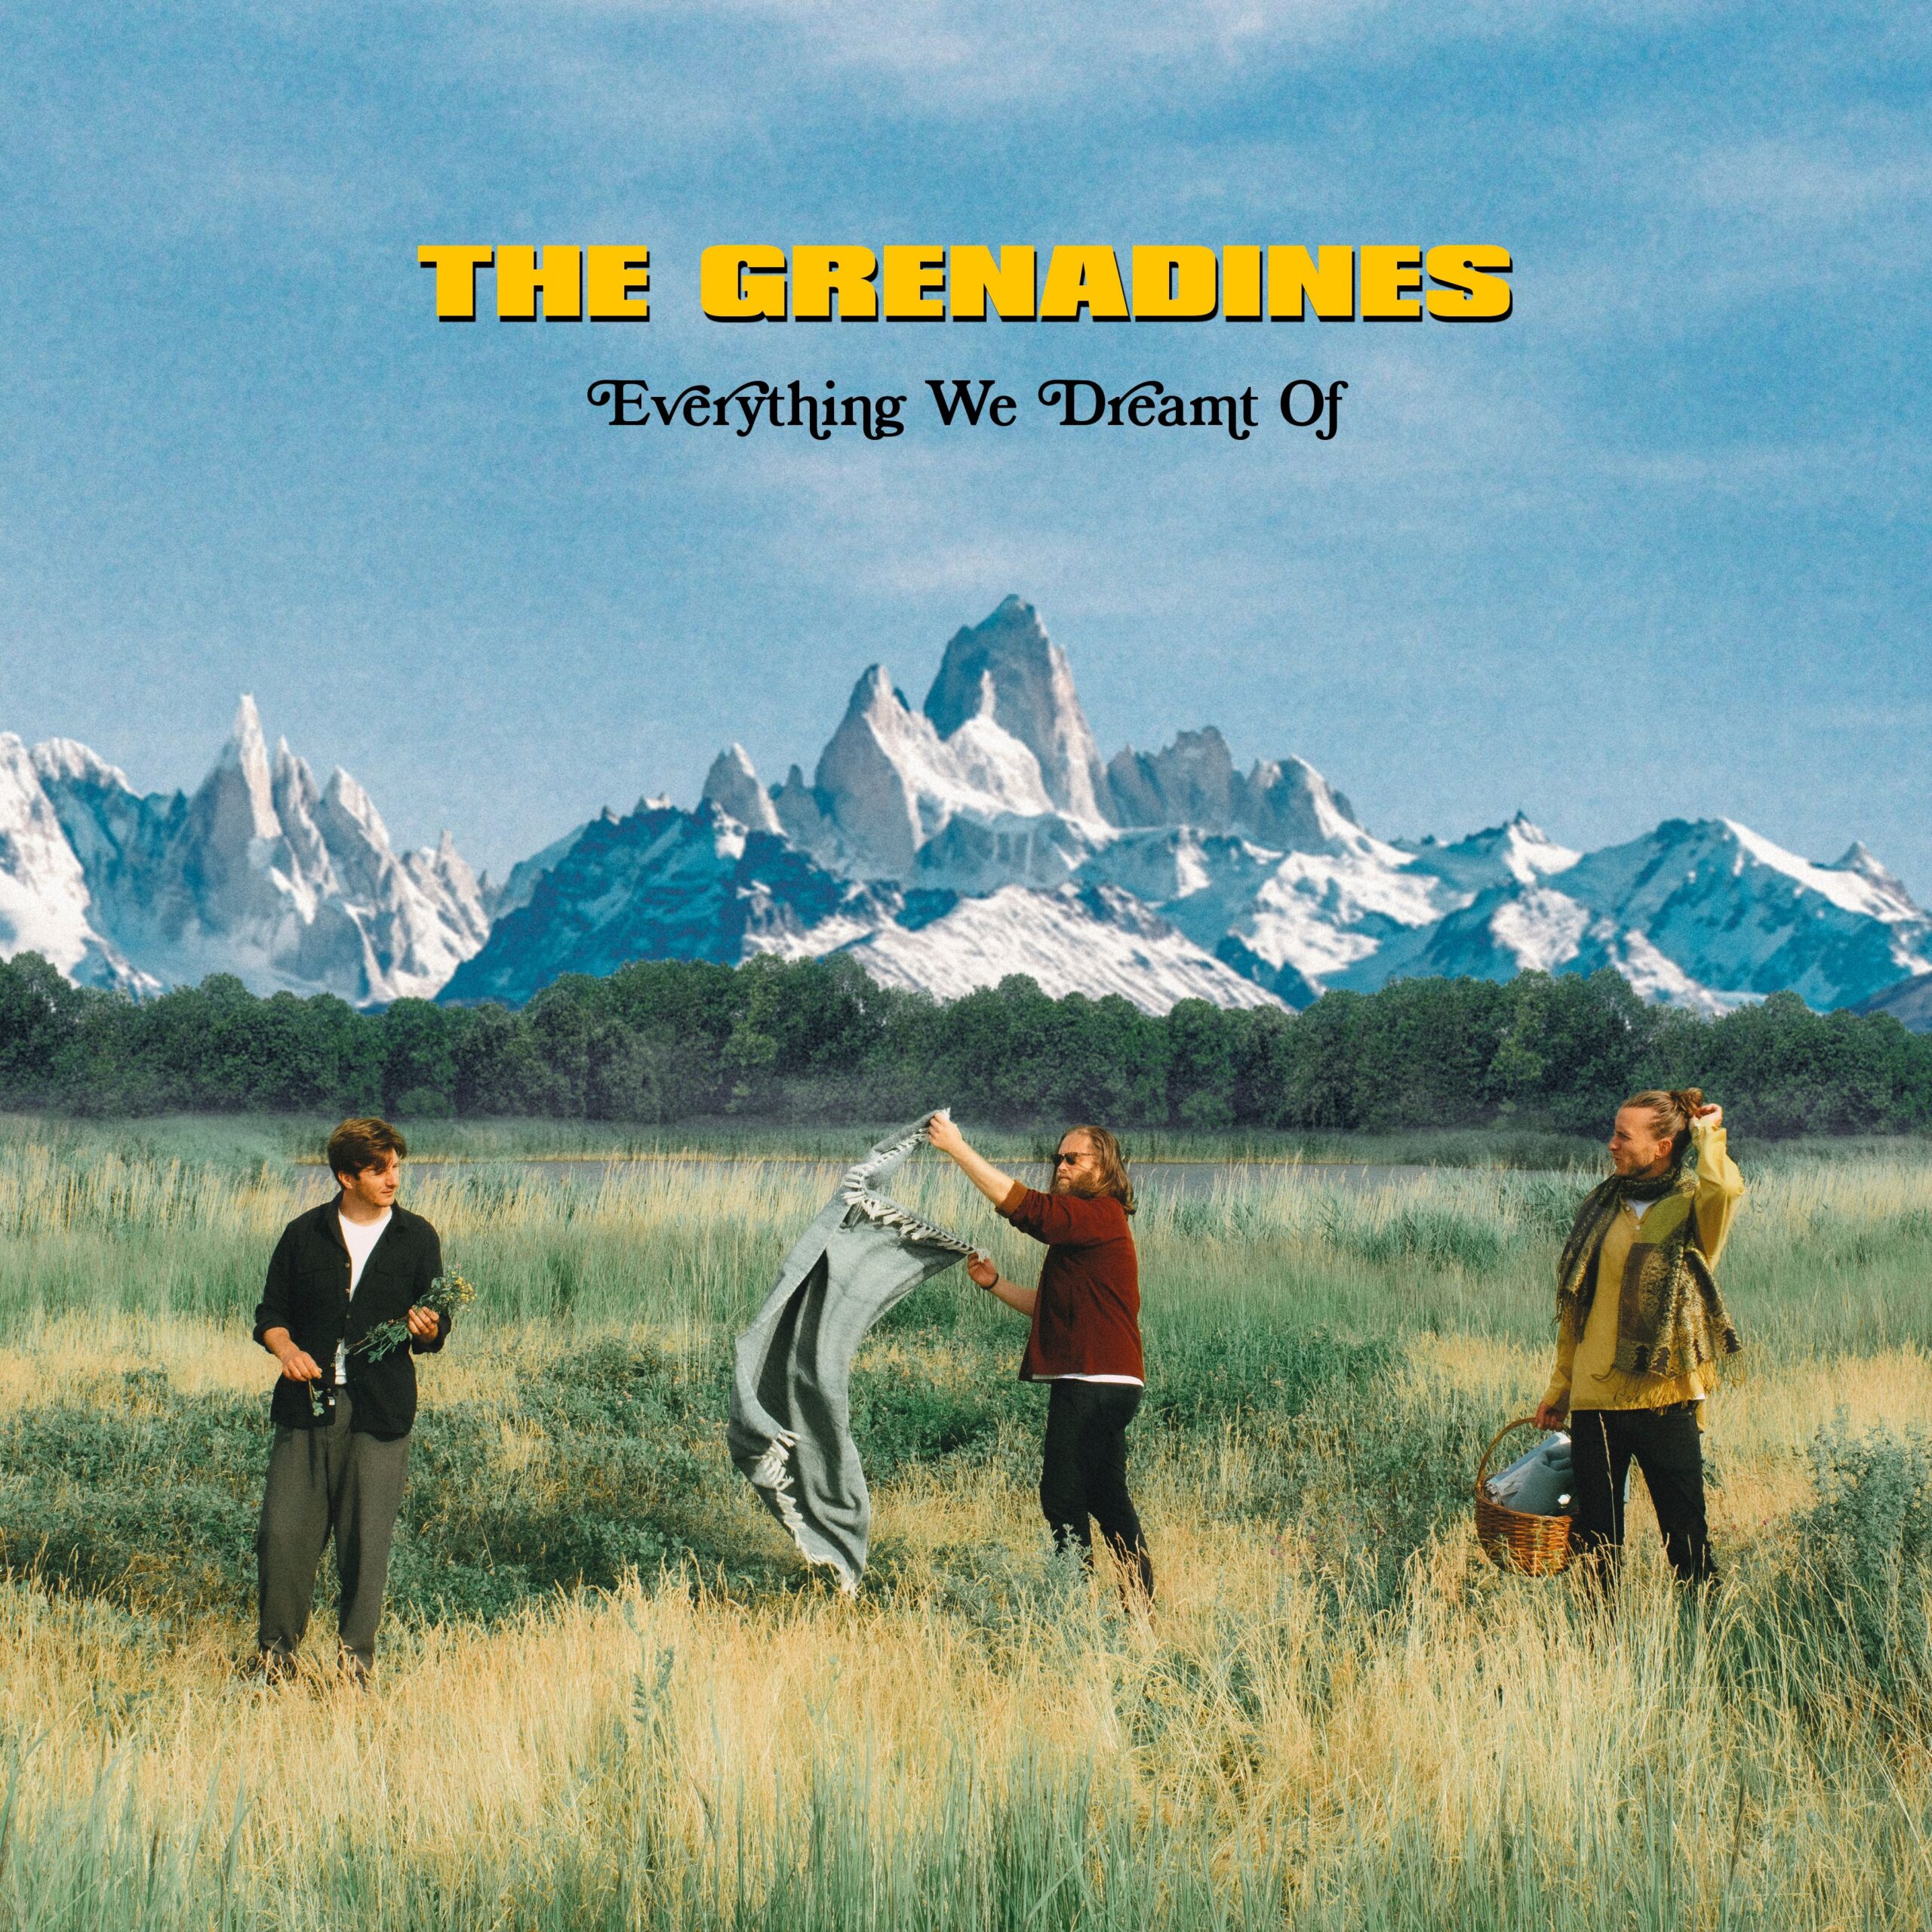 The Grenadines - Everything We Dreamt Of